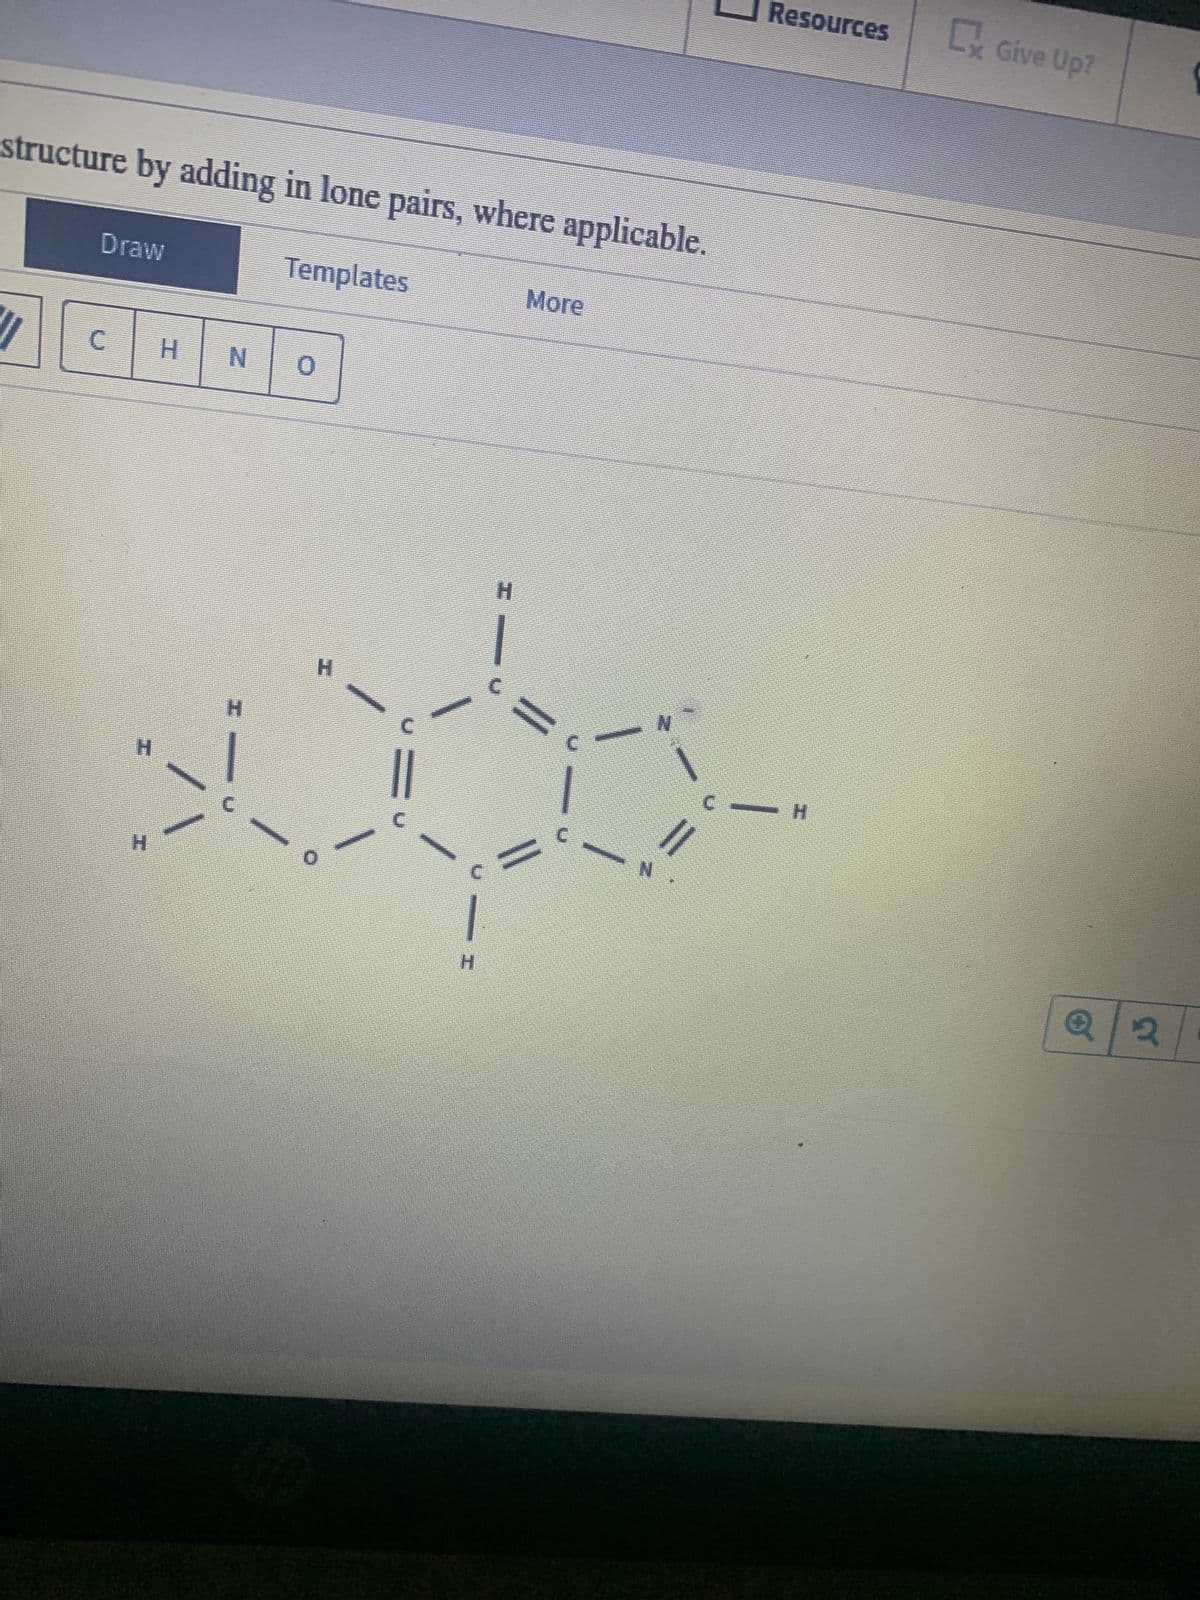 structure by adding in lone pairs, where applicable.
Templates
Draw
C
H
H
NO
H
||
|
More
=
N
N
Resources C Give Up?
-H
Q2
S